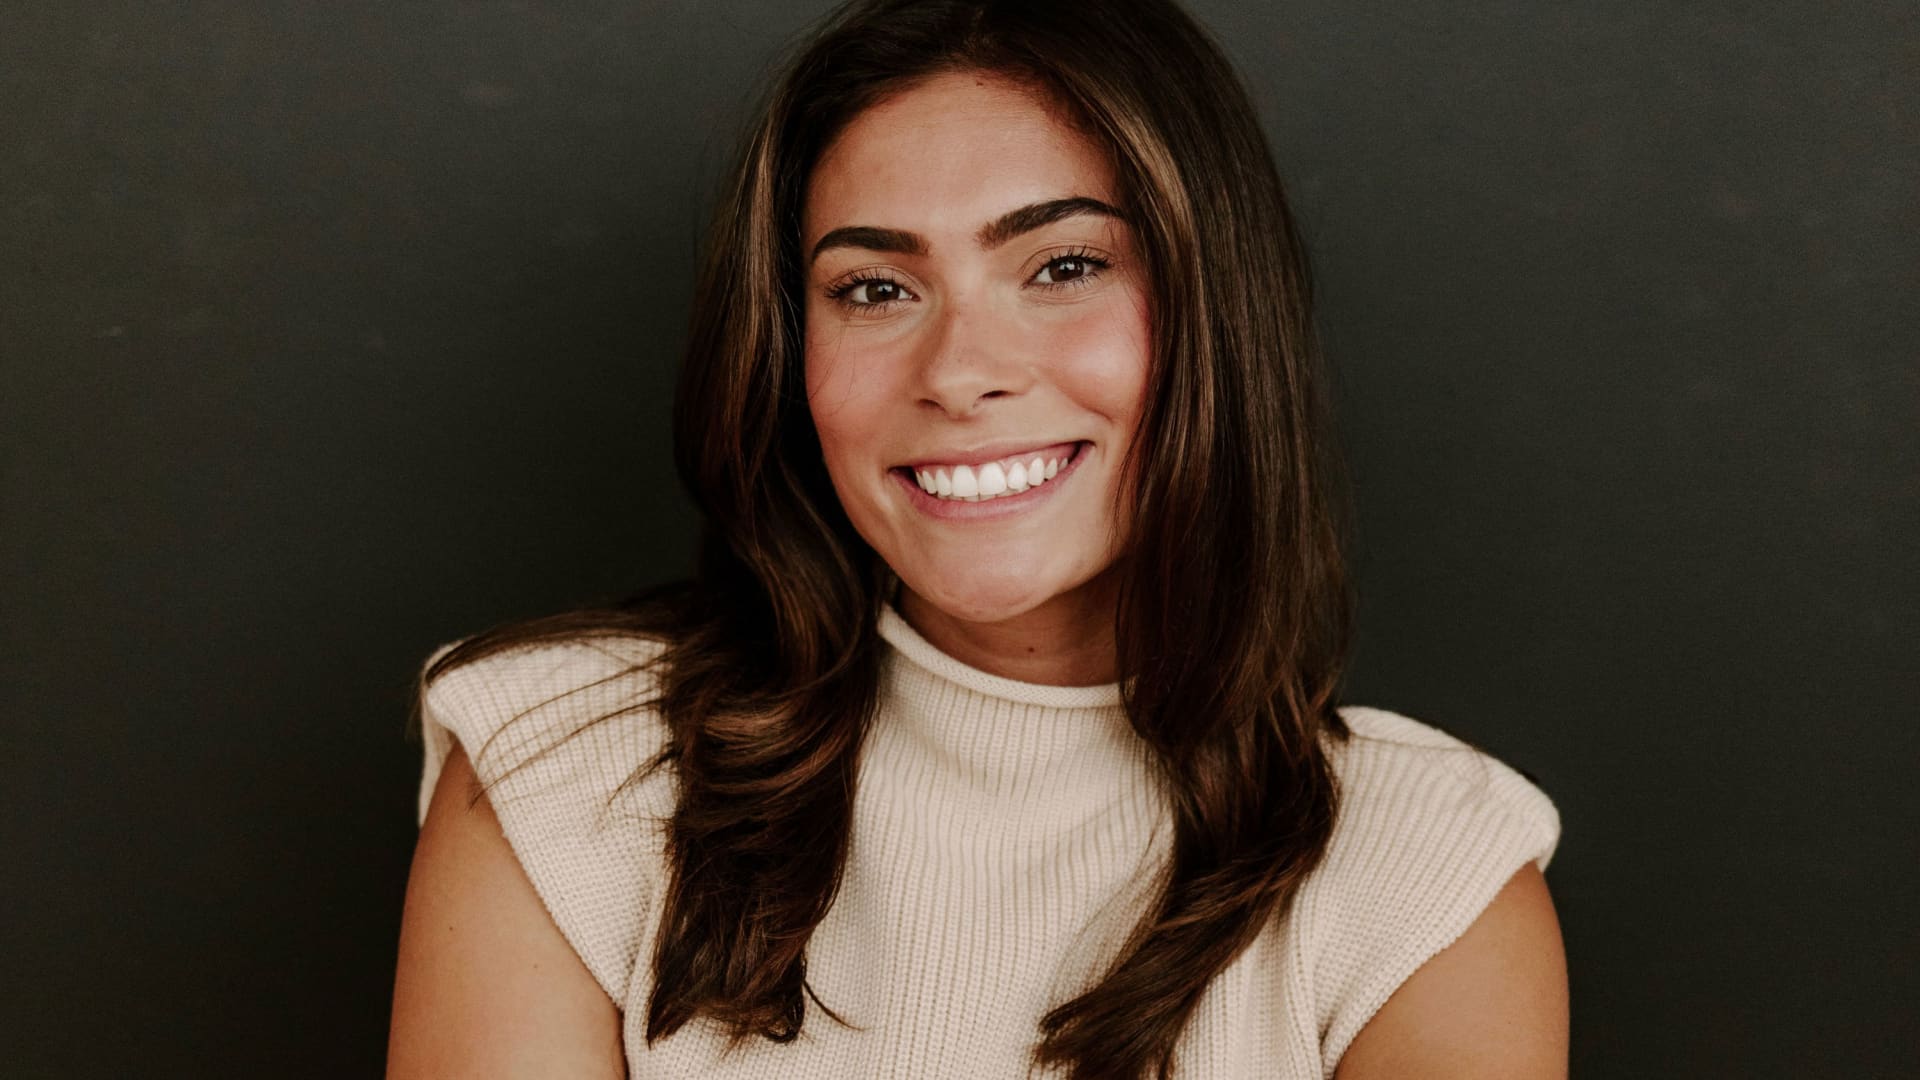 Lucia Cannata, a 2022 graduate from John Carroll University in Cleveland, Ohio and a real estate agent for Howard Hanna.